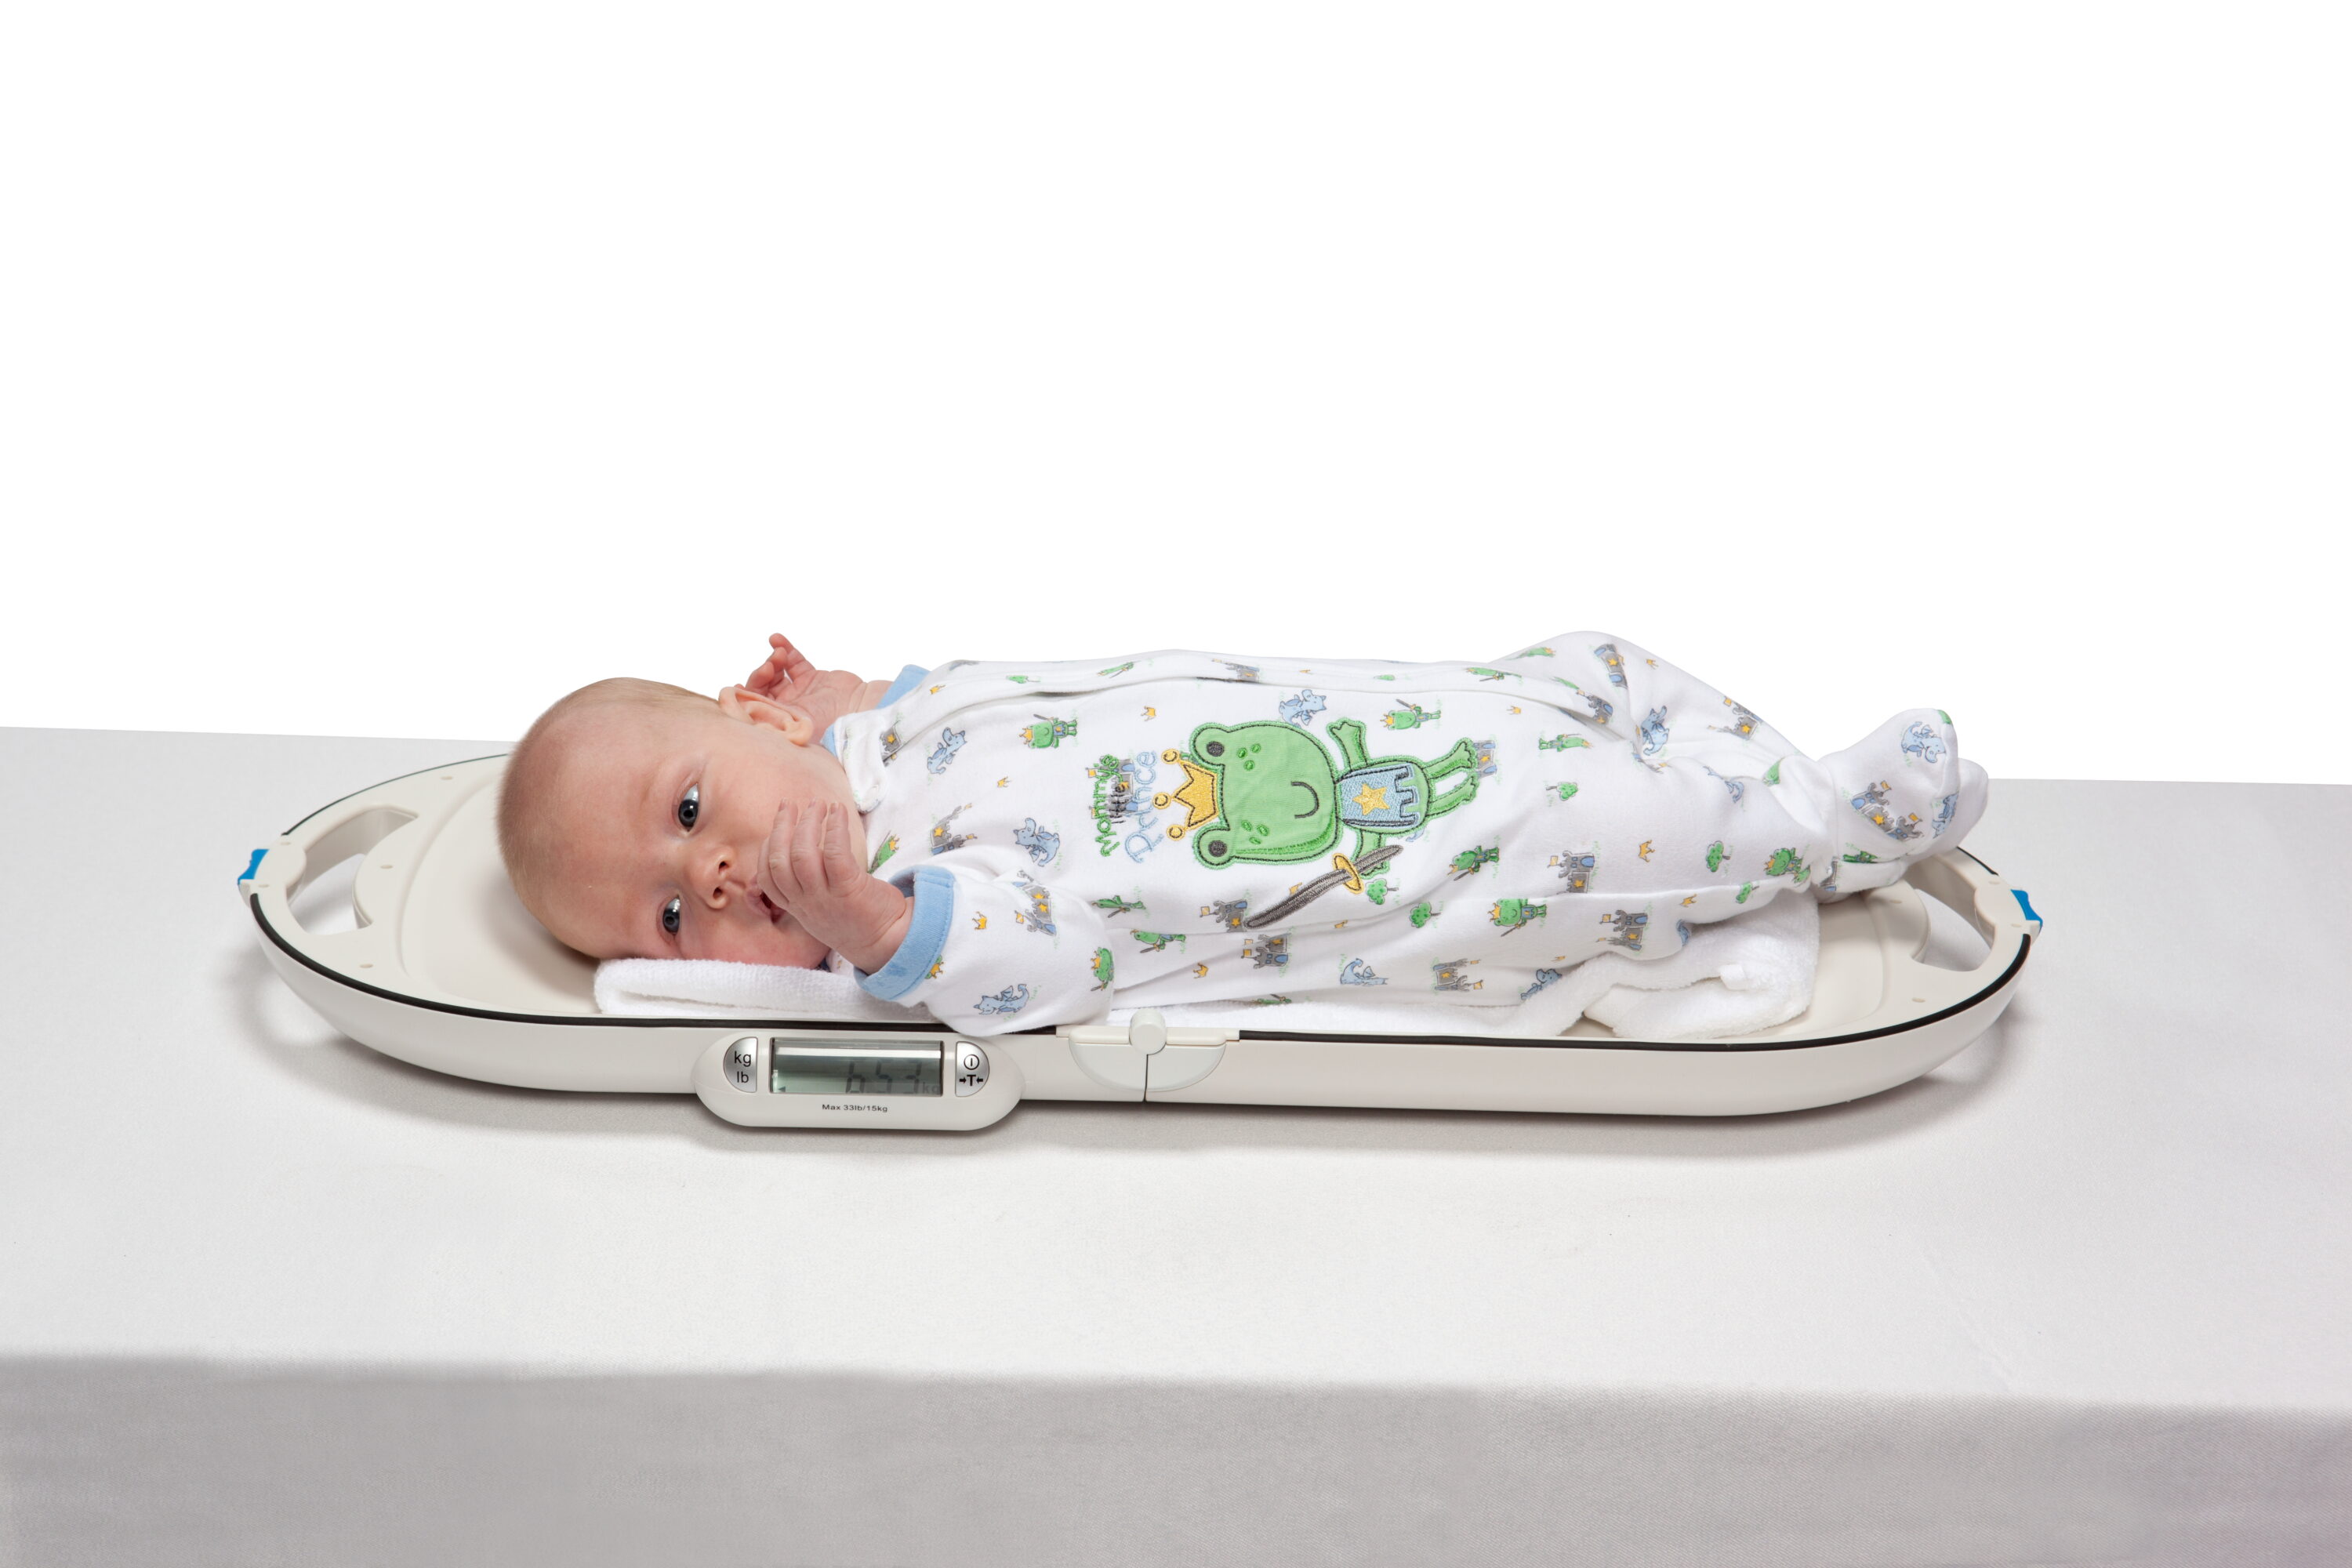 MS4200 Digital Baby Scale with Removable Tray